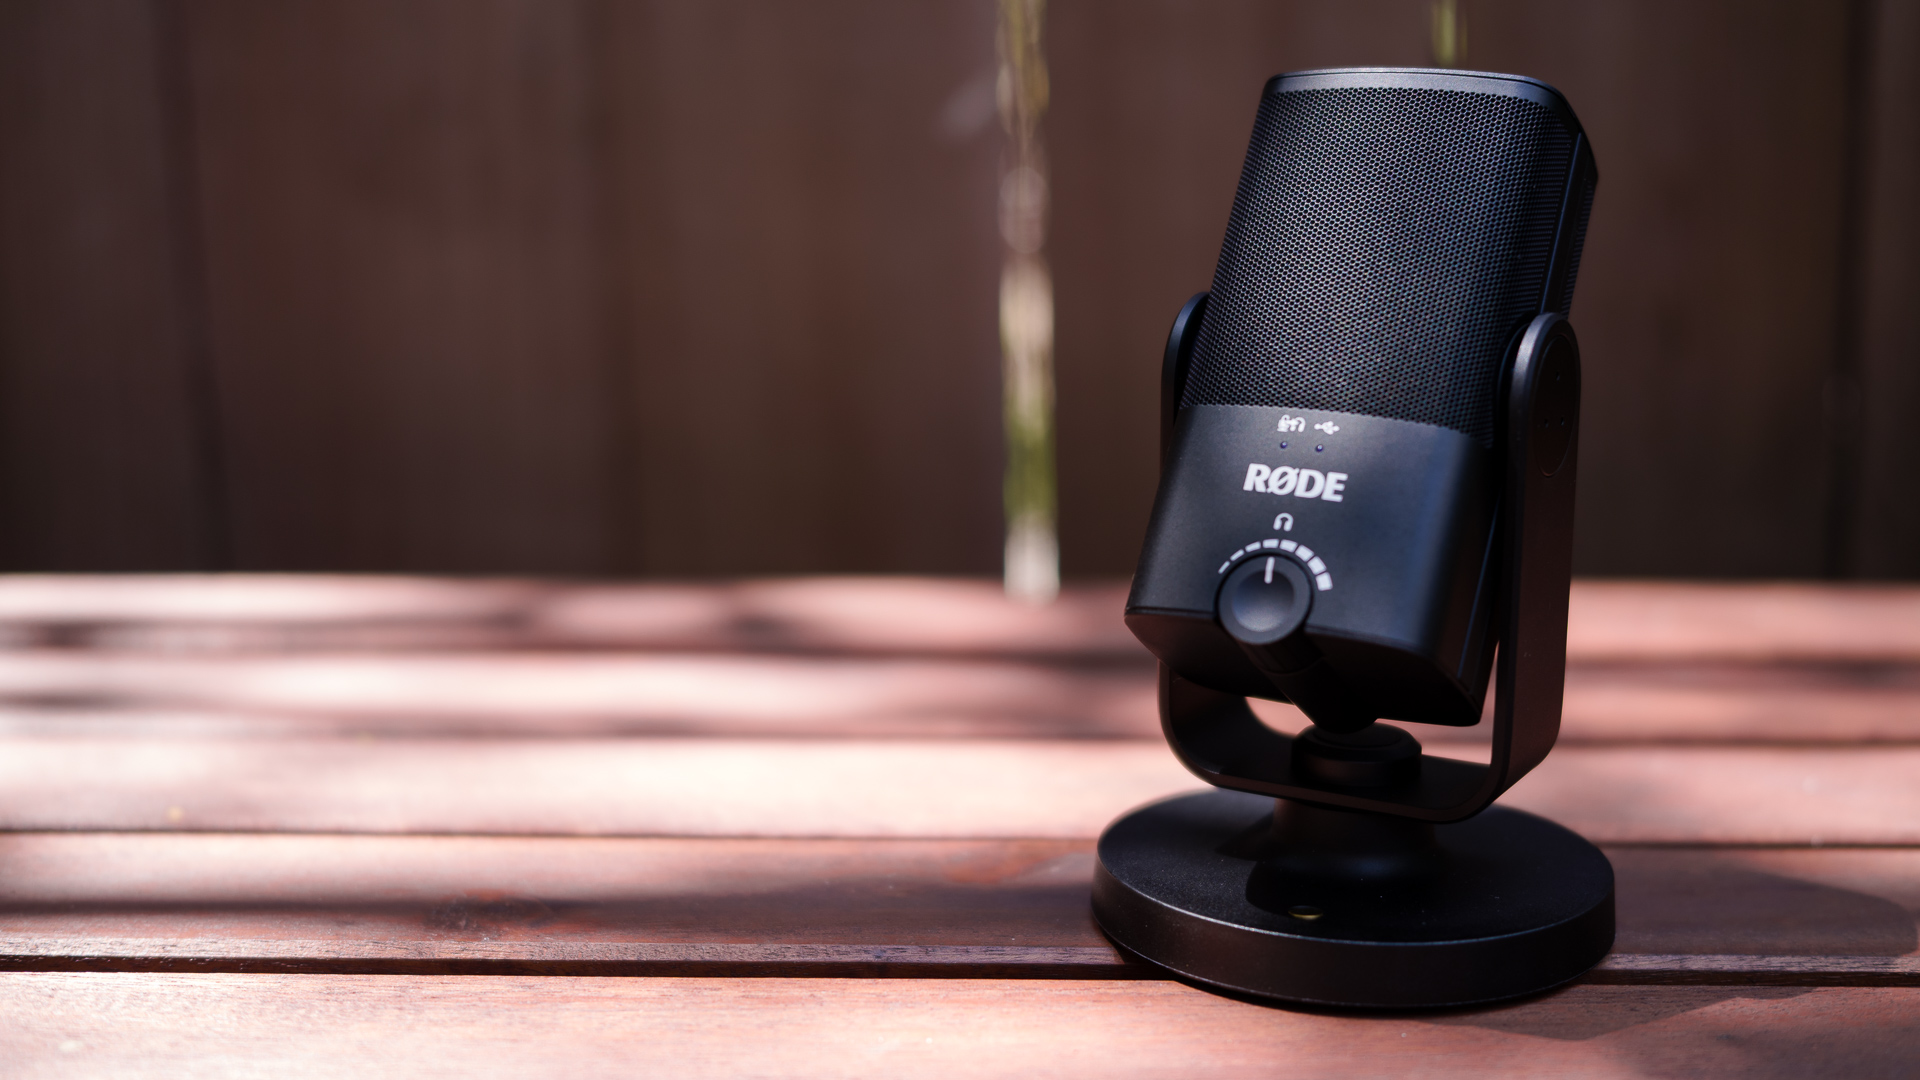 Rode NT-USB: USB Recording Microphone Review